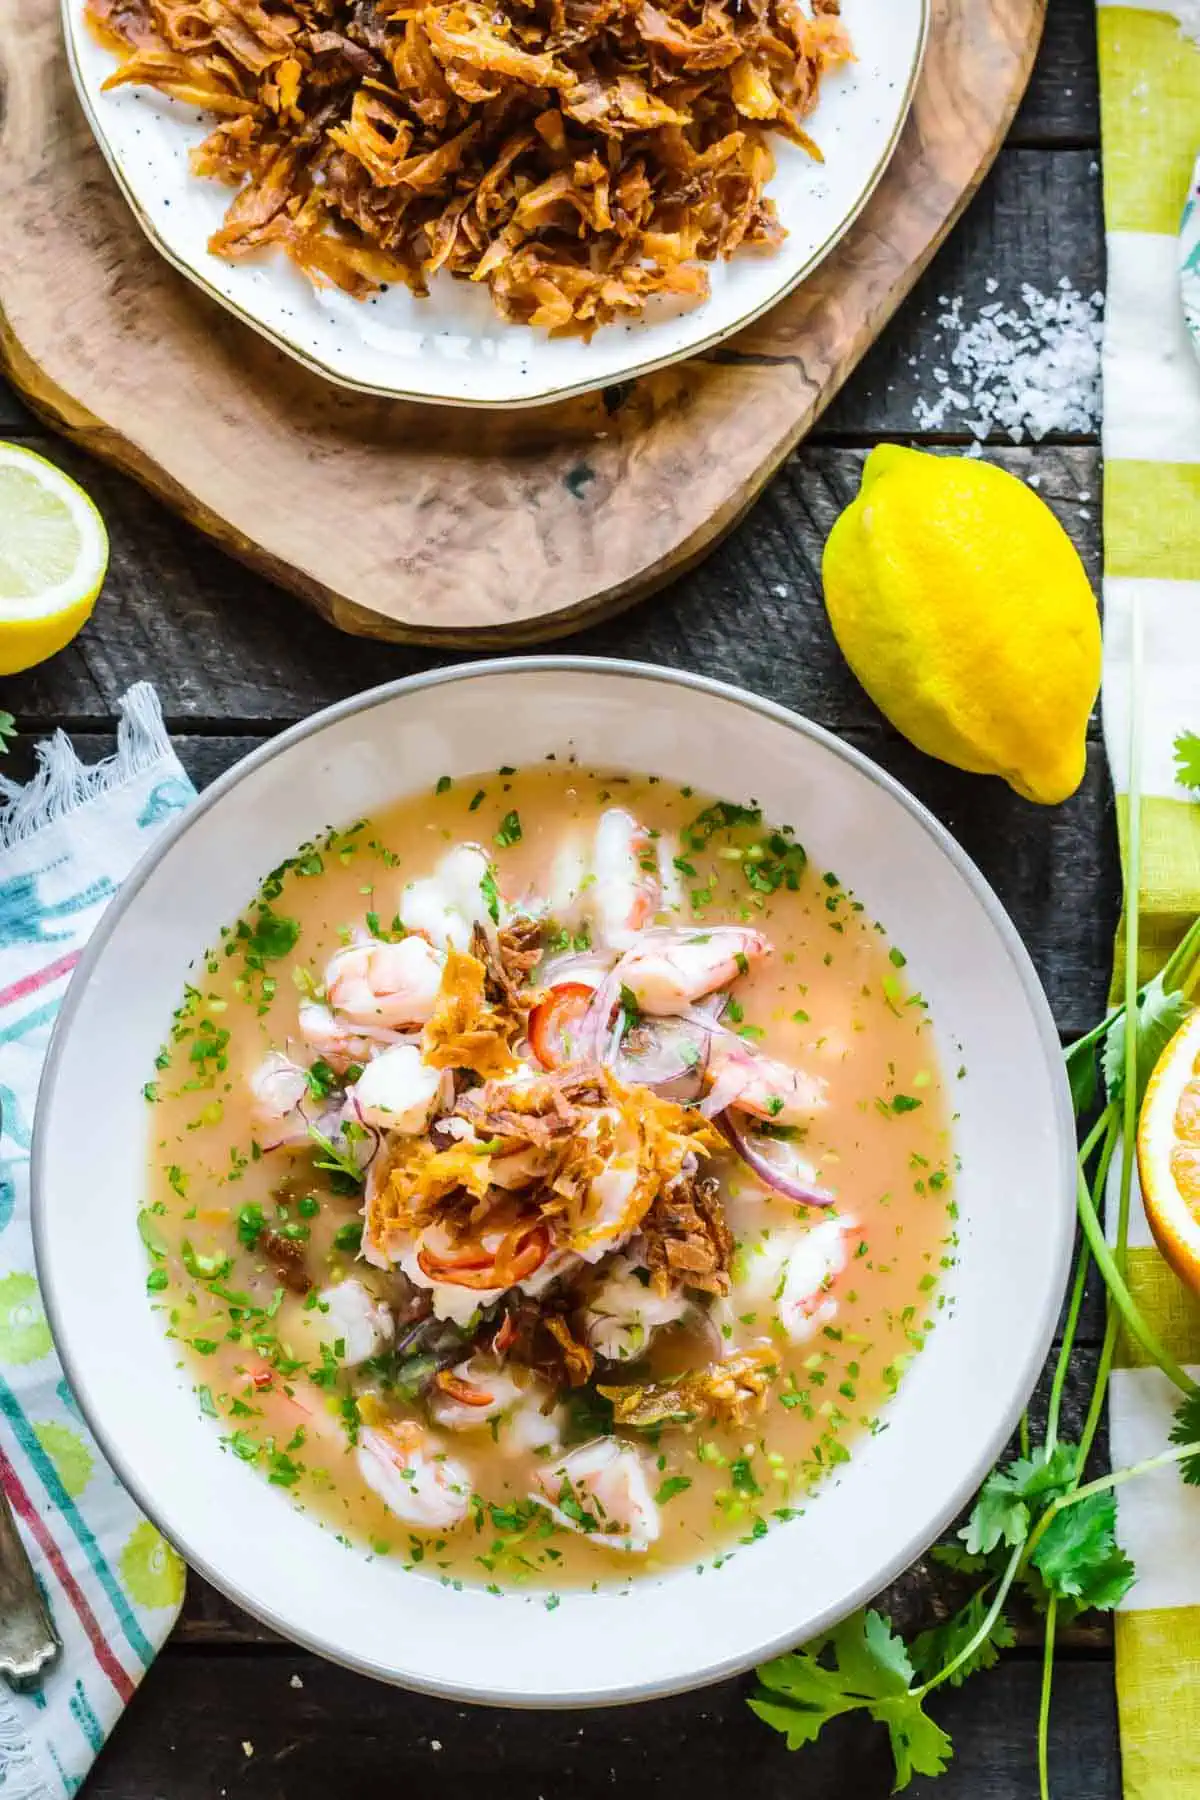 A bowl of Ecuadorian shrimp ceviche with fried plantains and lemons on the side.